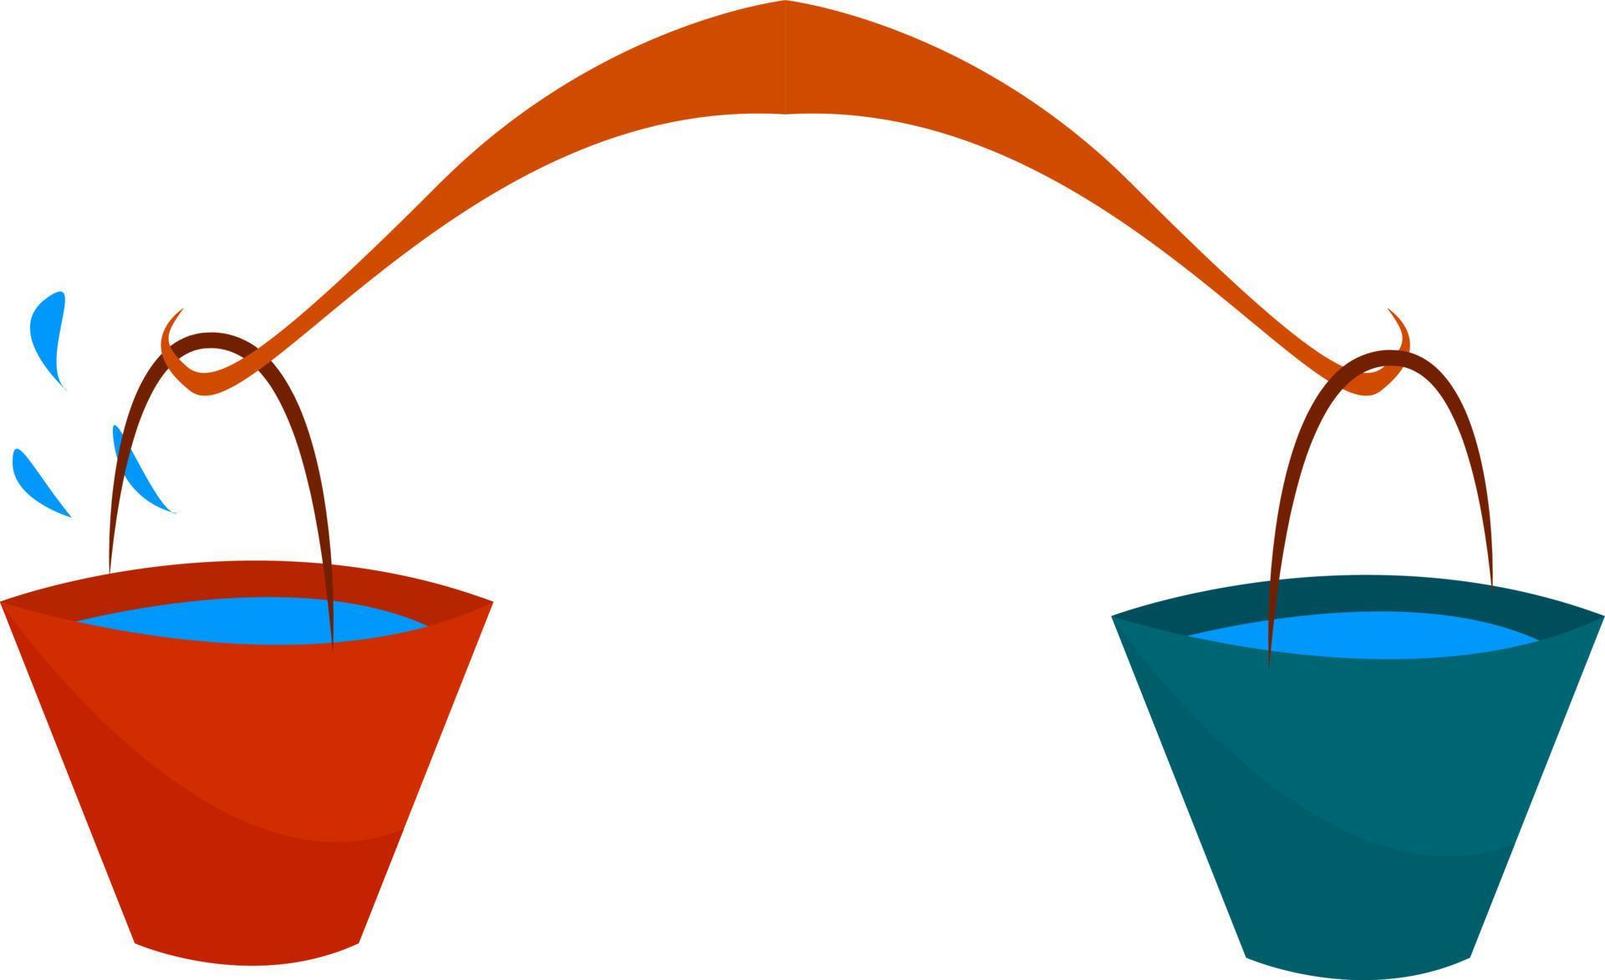 Two buckets of water, illustration, vector on white background.